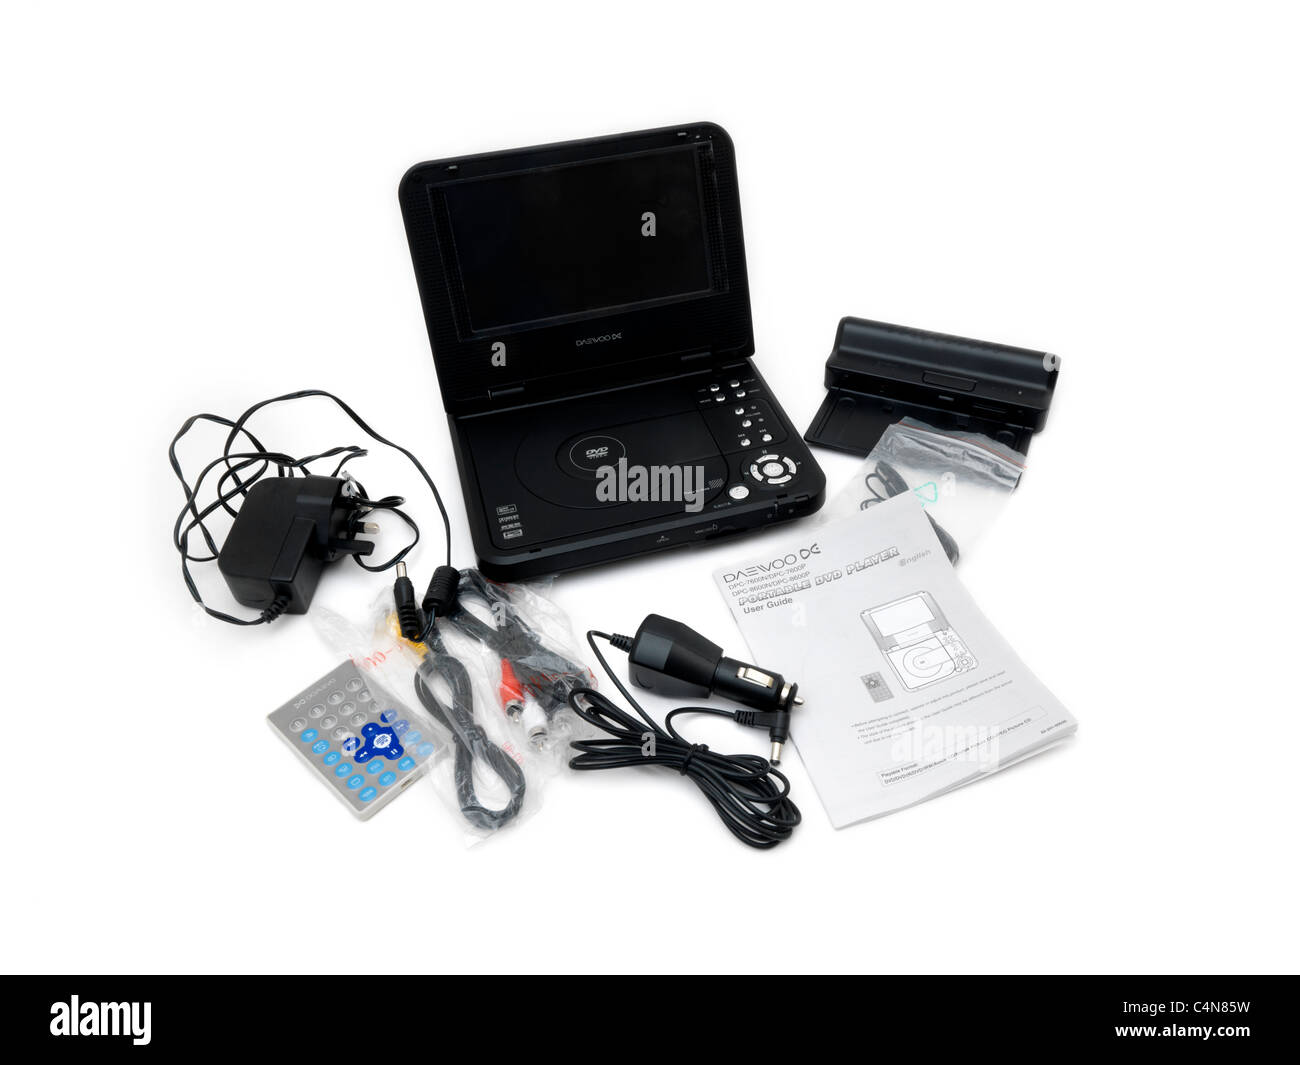 Portable Daewoo DVD Player And Accessories - Charger, Car Charger, Remote  Control, Cables And Instruction Manual Stock Photo - Alamy